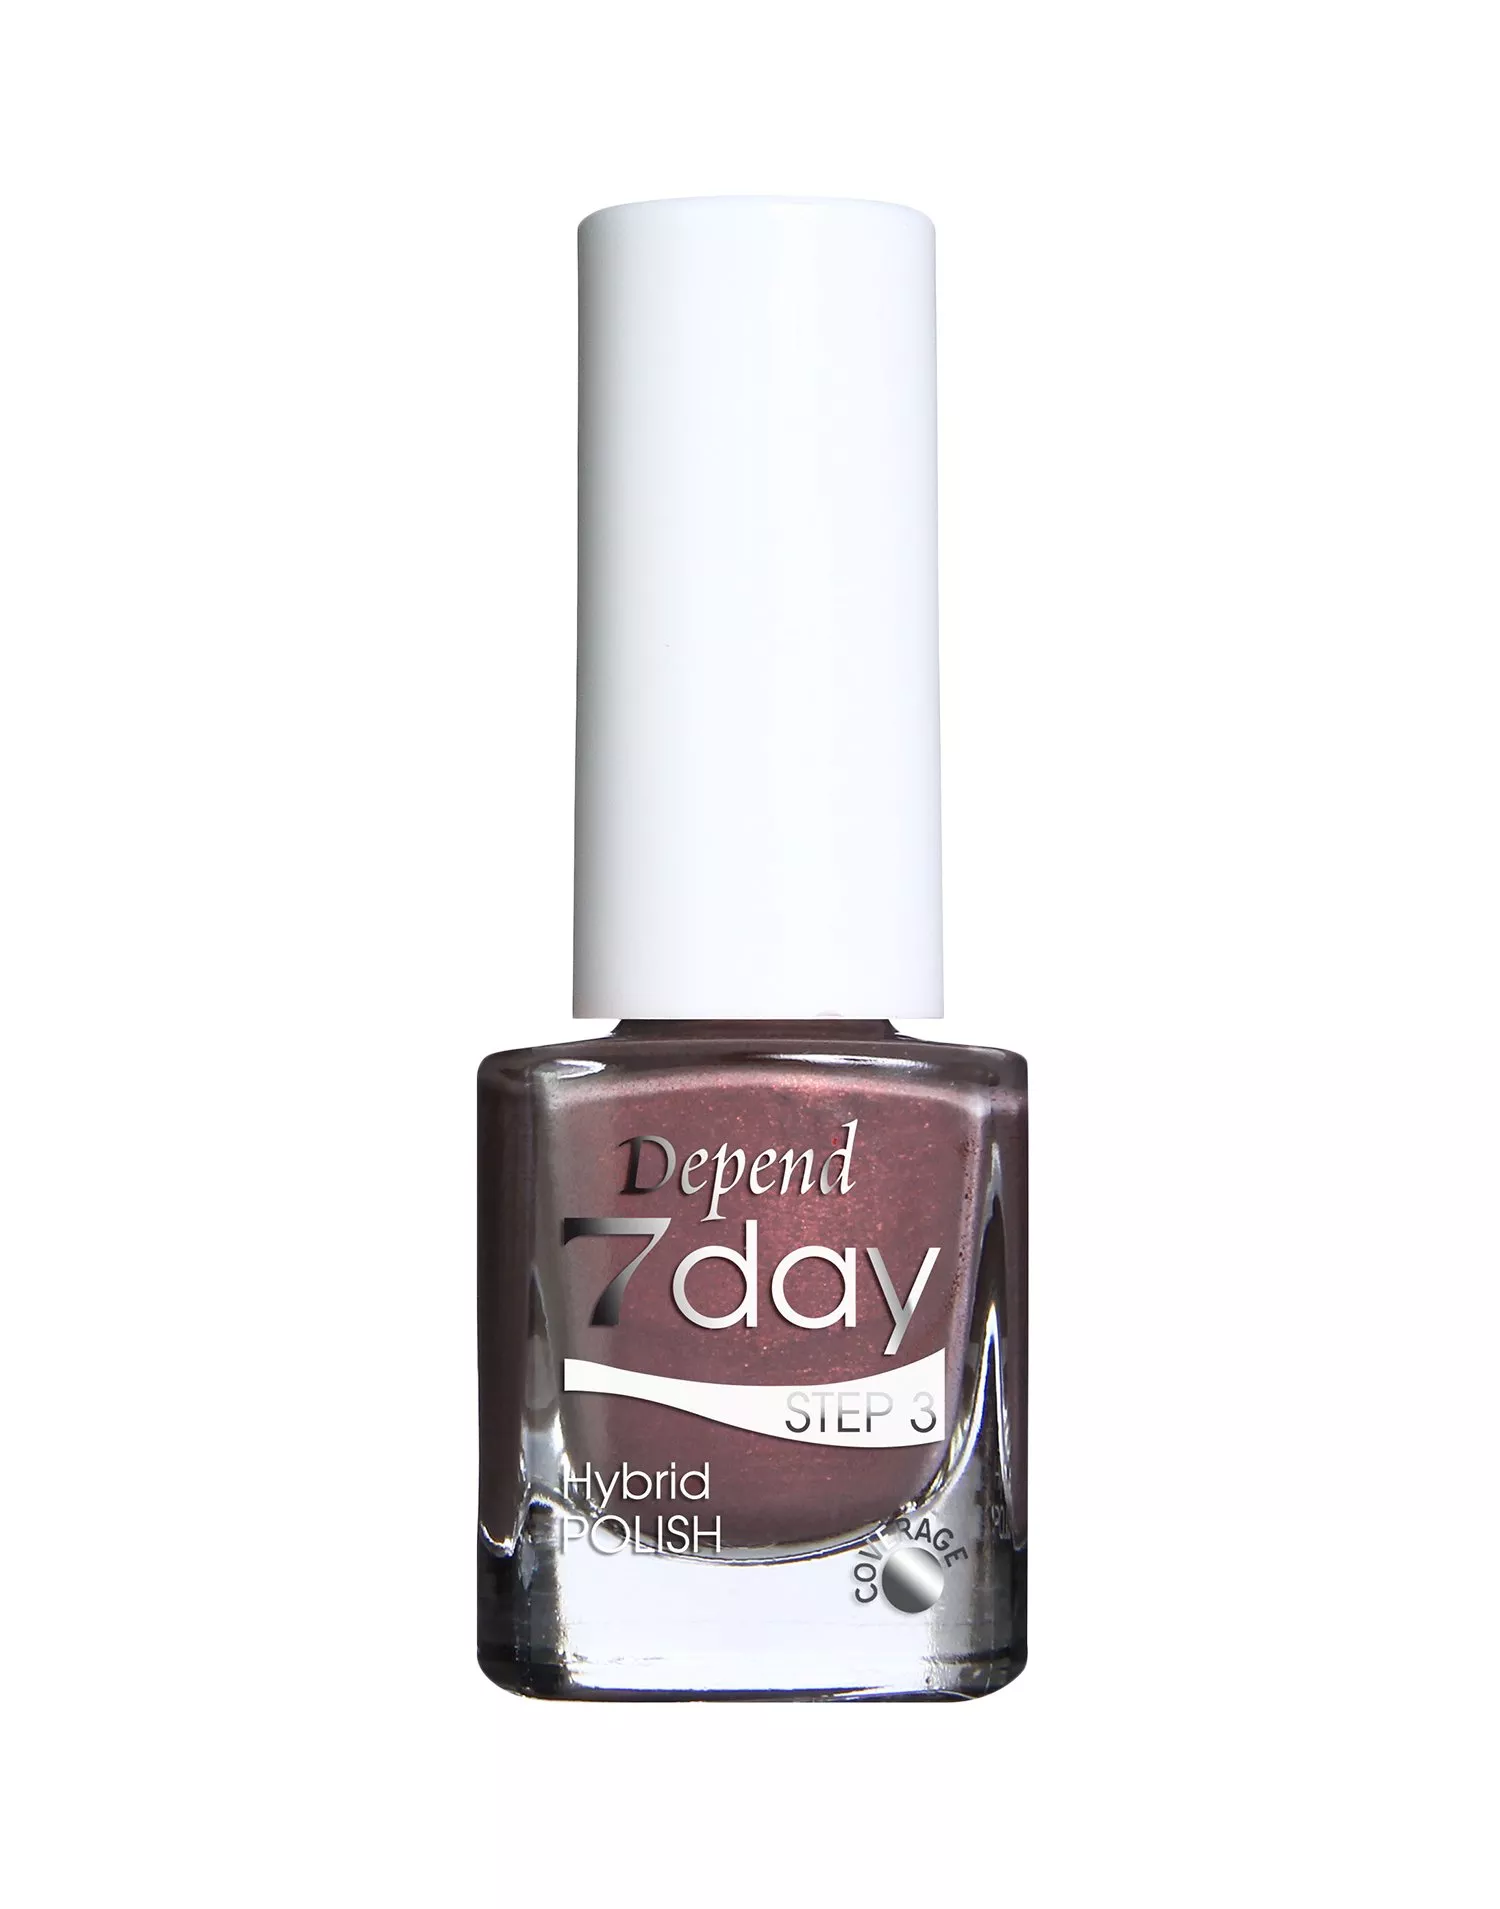 Køb Depend 7day Nailpolish - DYOT (Do own thing) | Nelly.com